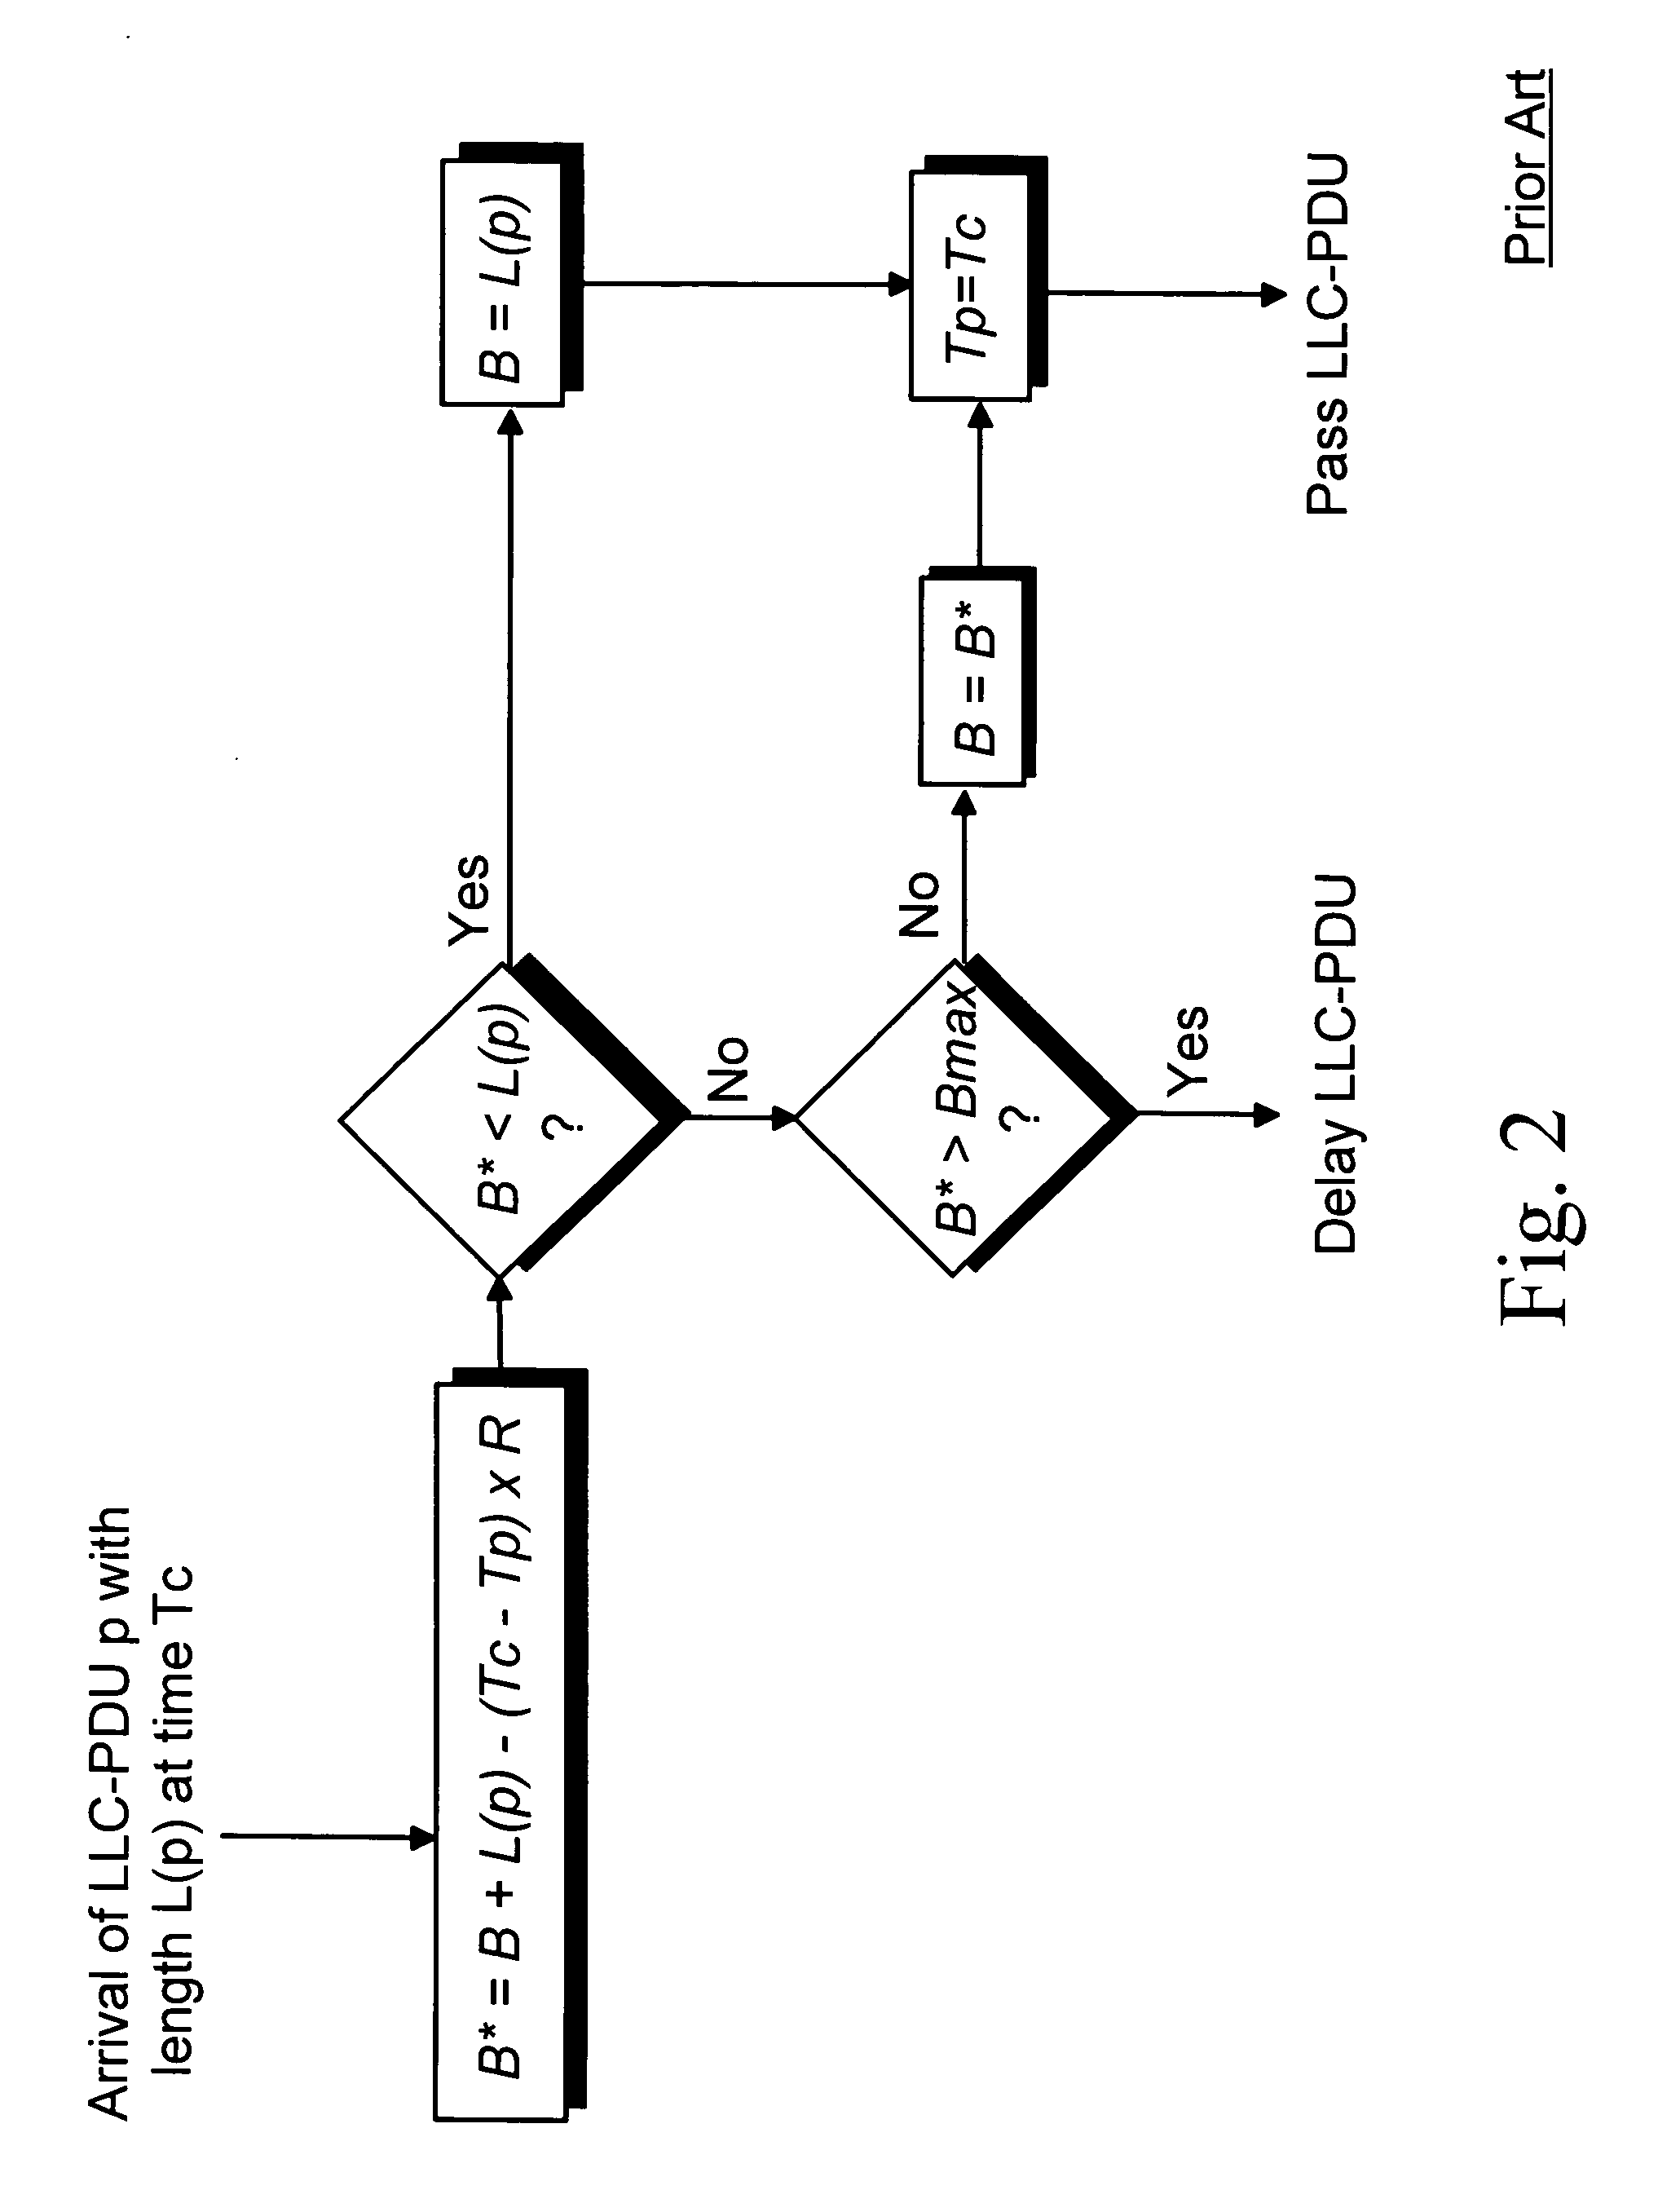 Packet scheduling of real time packet data